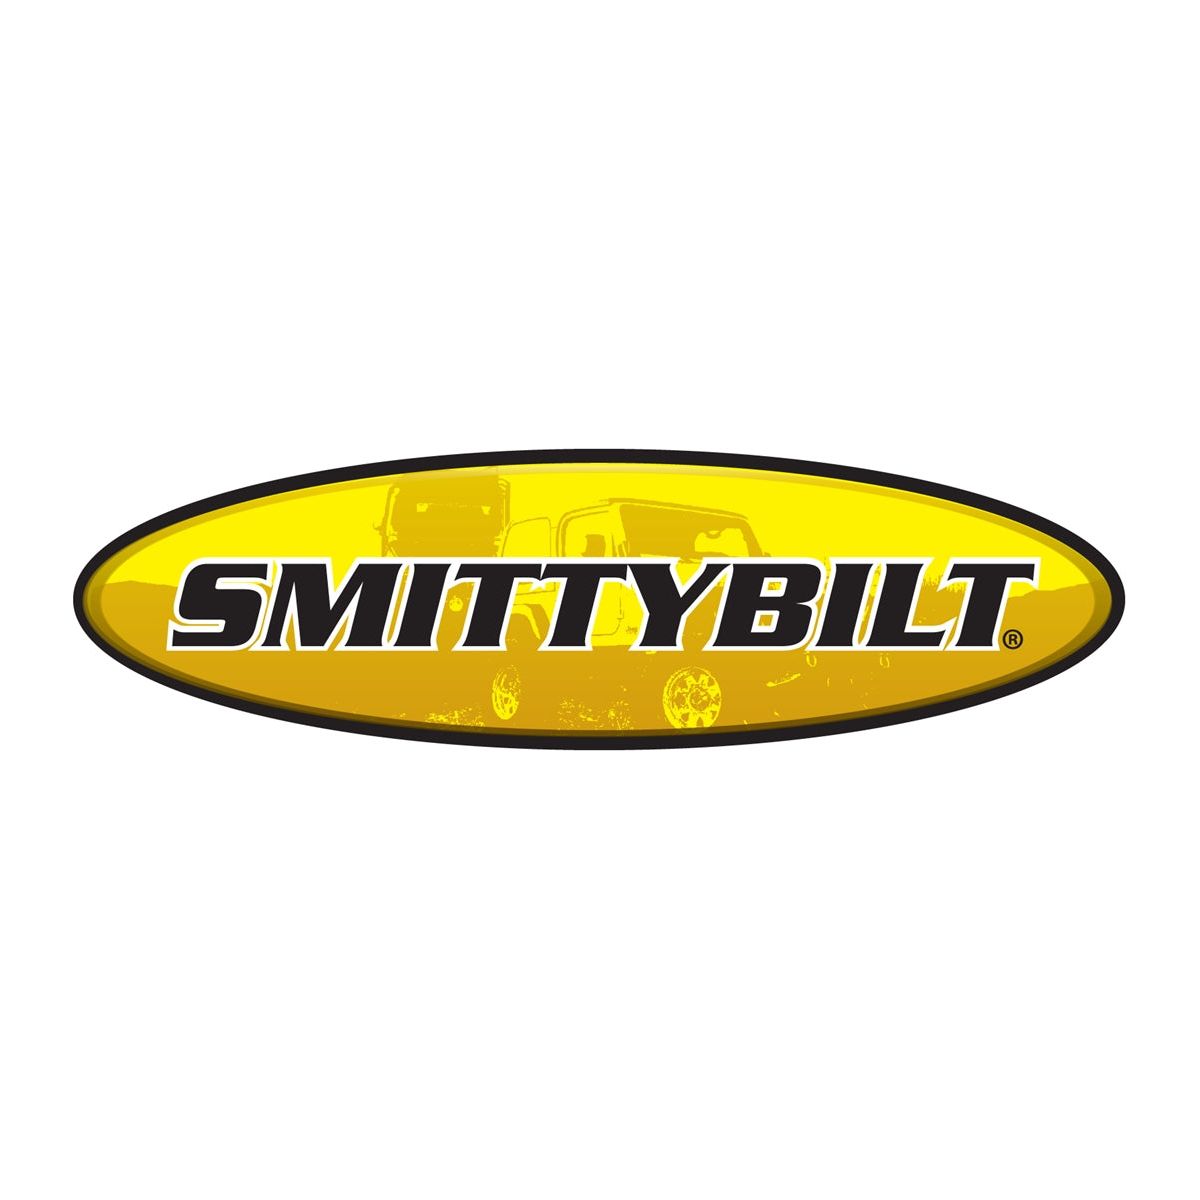 Smittybilt SRC Rear Bumper With Hitch & Tire Carrier Post Only In Black Textured For 1987-06 Jeep Wrangler YJ & TJ Models